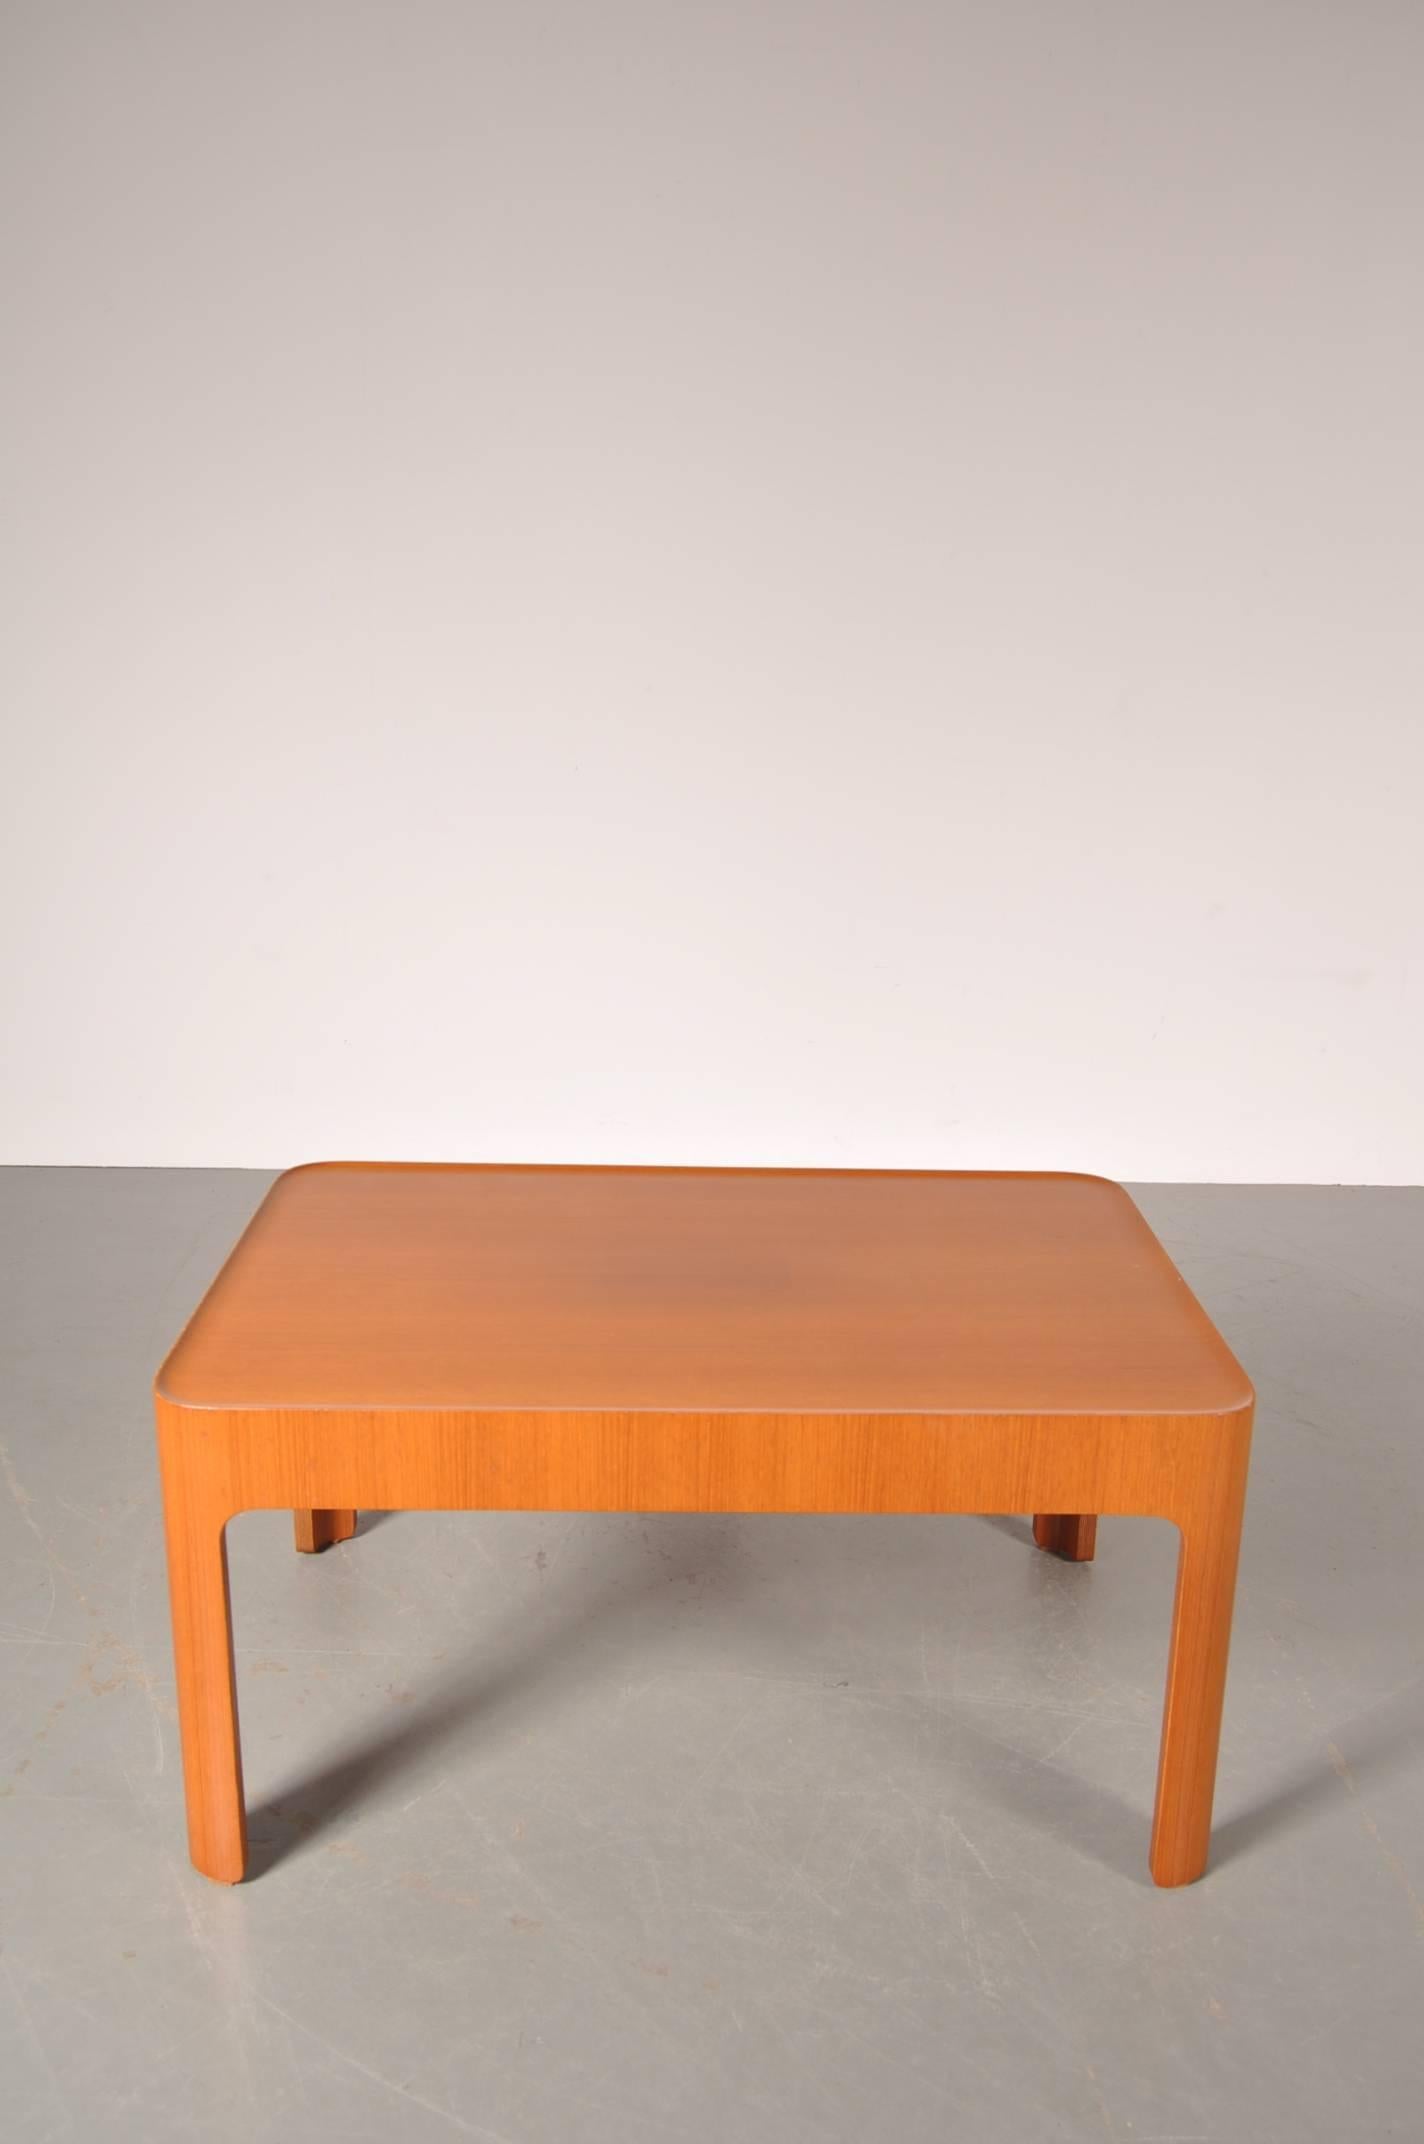 Mid-Century Modern Coffee or Side Table by Isamu Kenmochi for Tendo, Japan, 1967